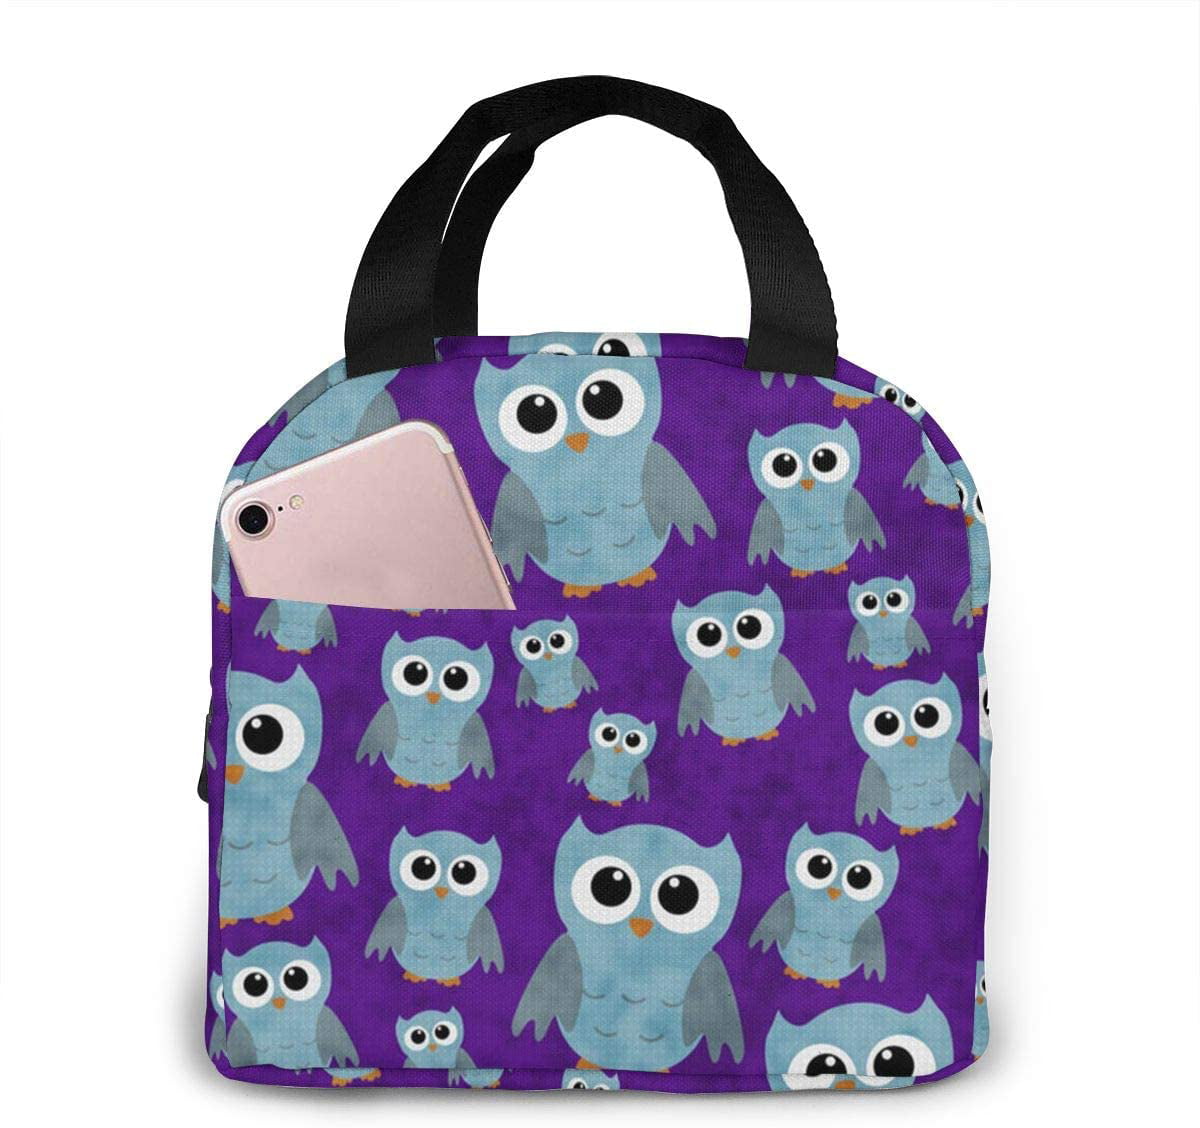 Lunch Box Bag Insulated Kids Owl Tote School Travel Girl Gift Pink Camp New 